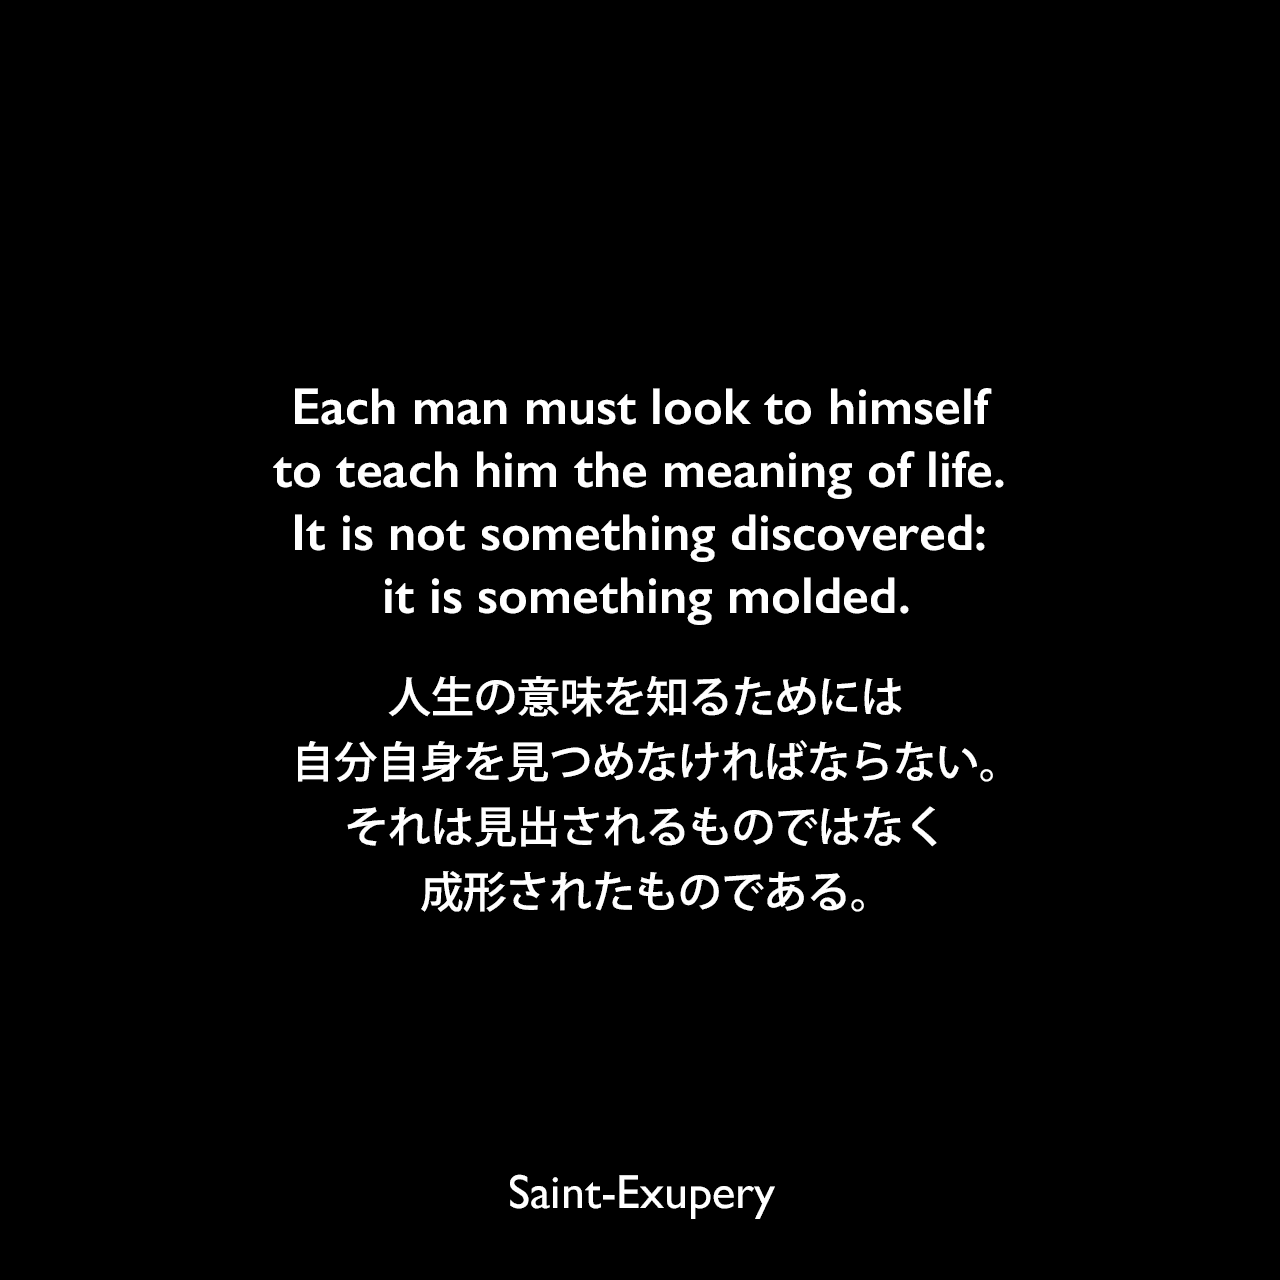 Each man must look to himself to teach him the meaning of life. It is not something discovered: it is something molded.人生の意味を知るためには、自分自身を見つめなければならない。それは見出されるものではなく成形されたものである。Saint-Exupery